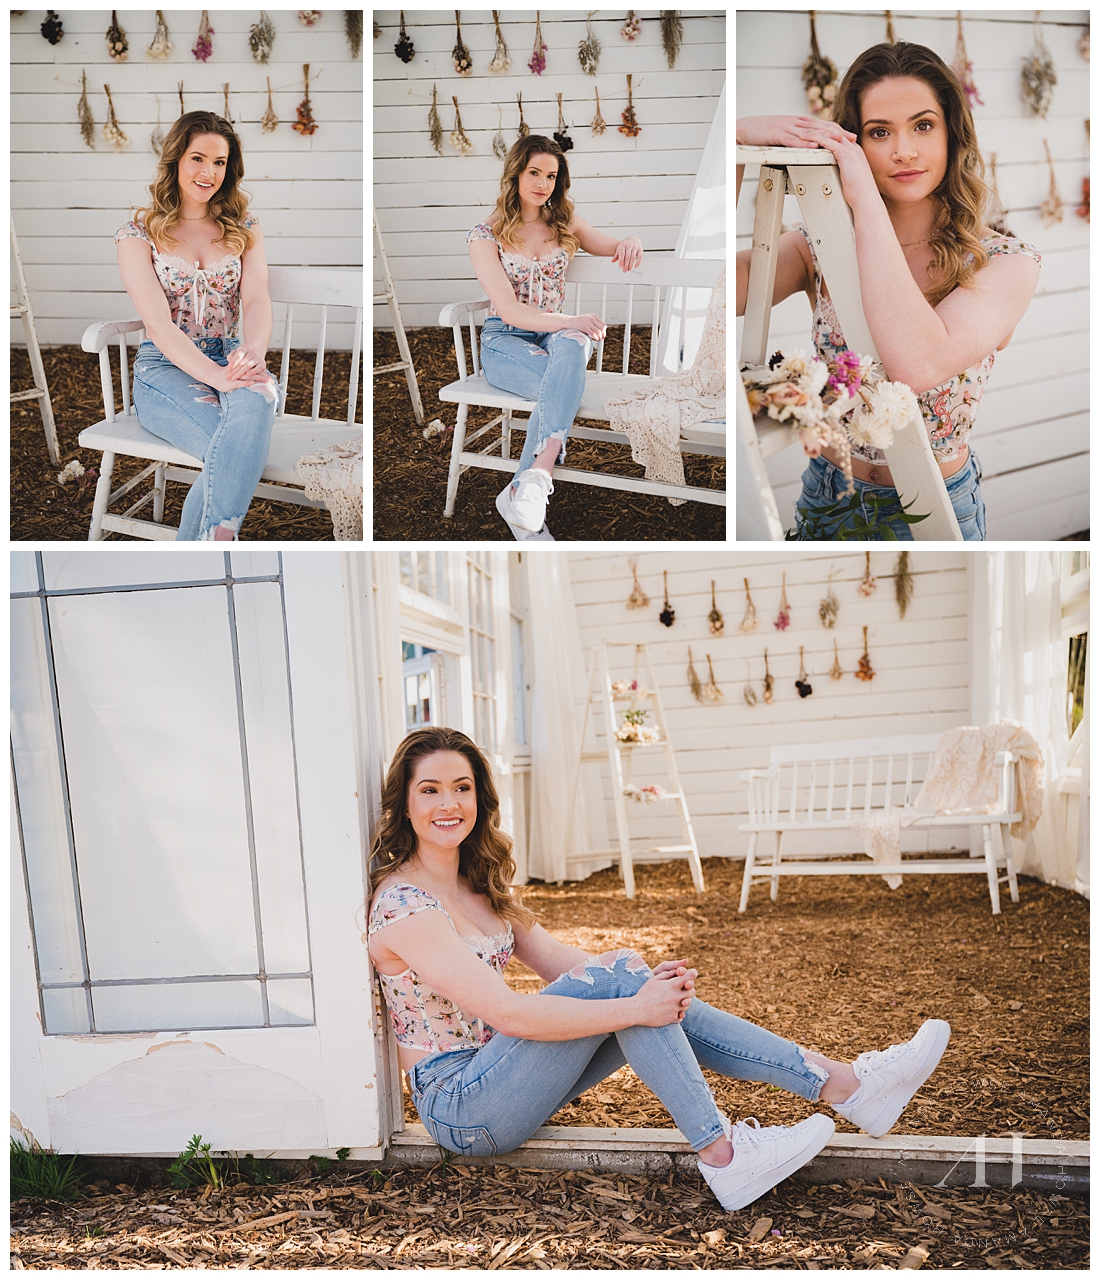 Fun Senior Portraits at Wild Hearts Farm | How to Style Jeans and a Corset, Hair and Makeup Ideas for Senior Portraits | Photographed by the Best Tacoma Senior Portrait Photographer Amanda Howse Photography 